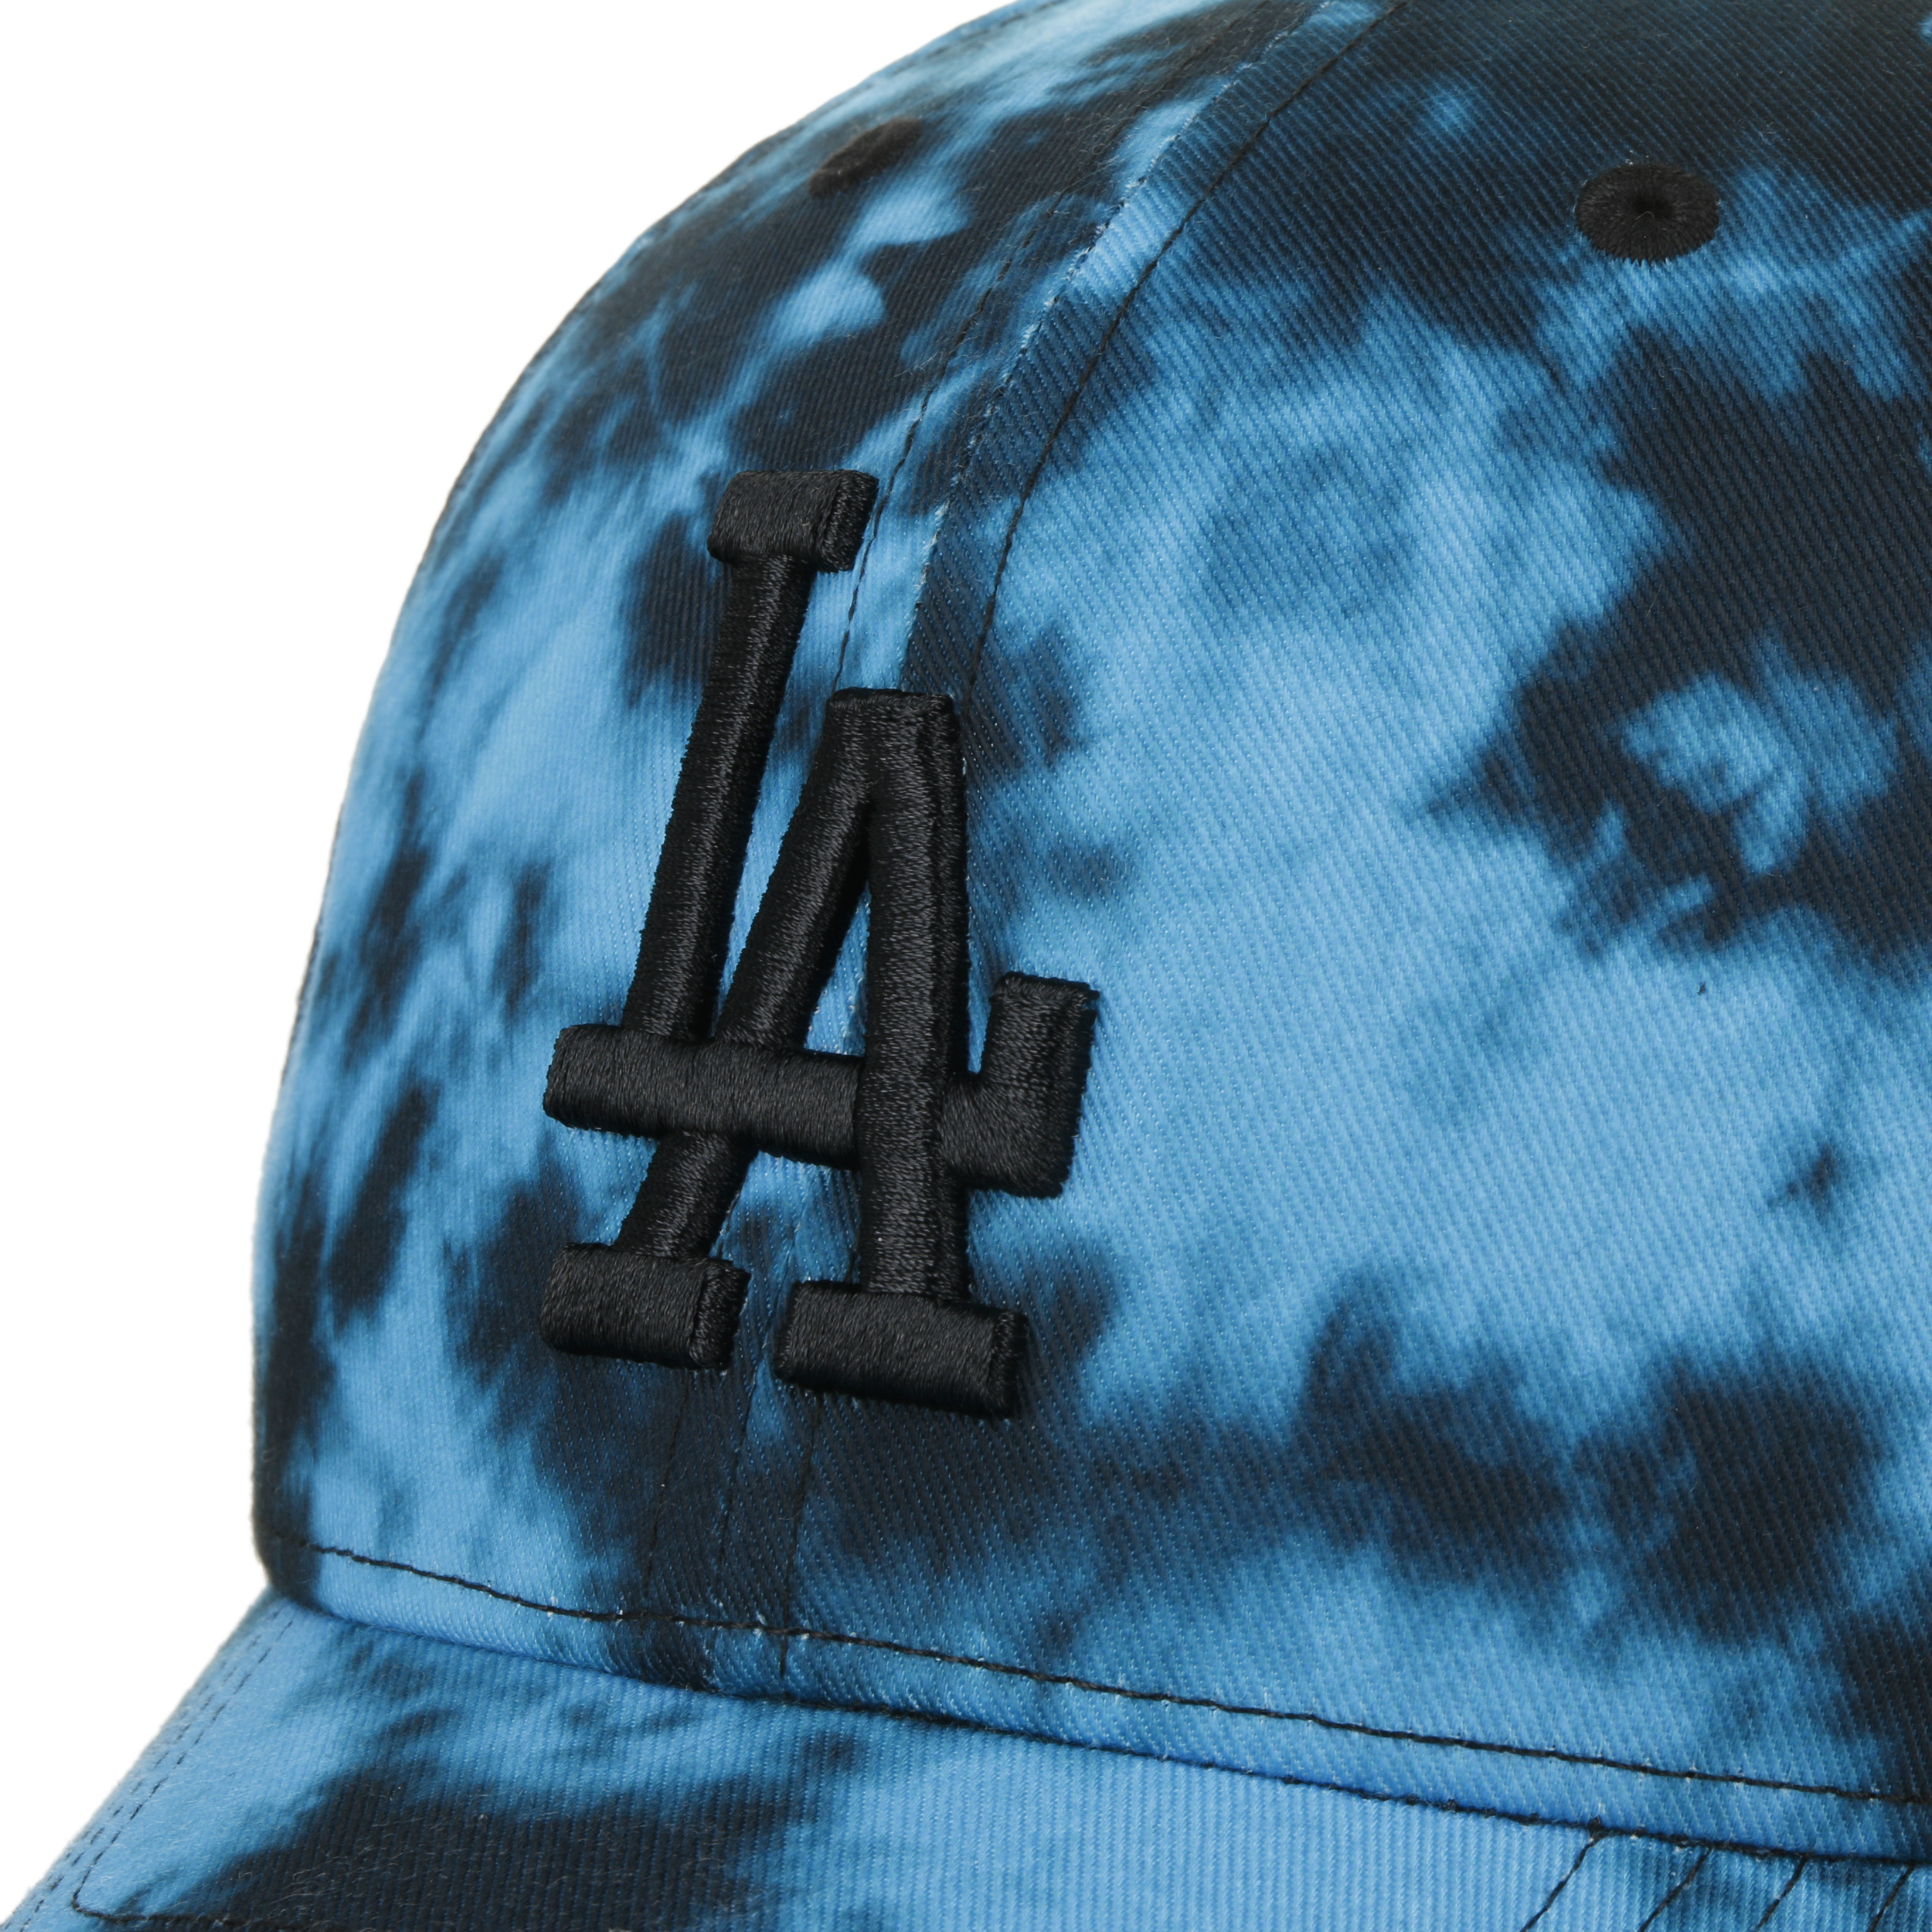 MLB Dodgers Tinted Snapback Cap by 47 Brand